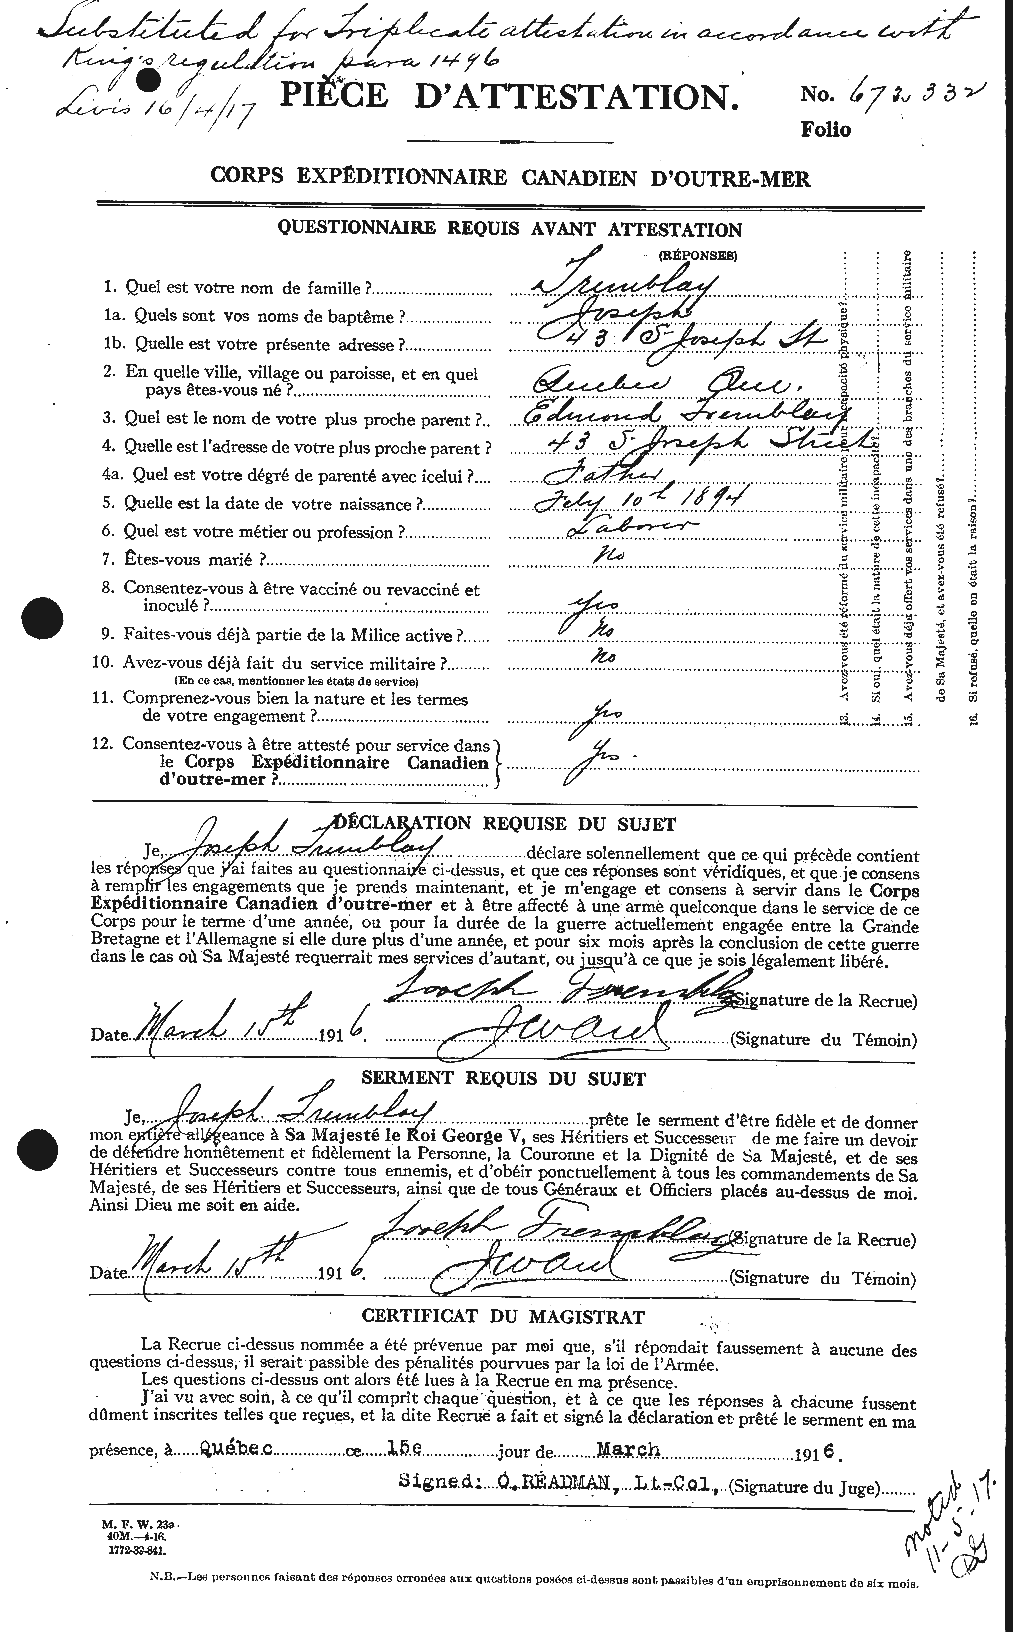 Personnel Records of the First World War - CEF 639129a